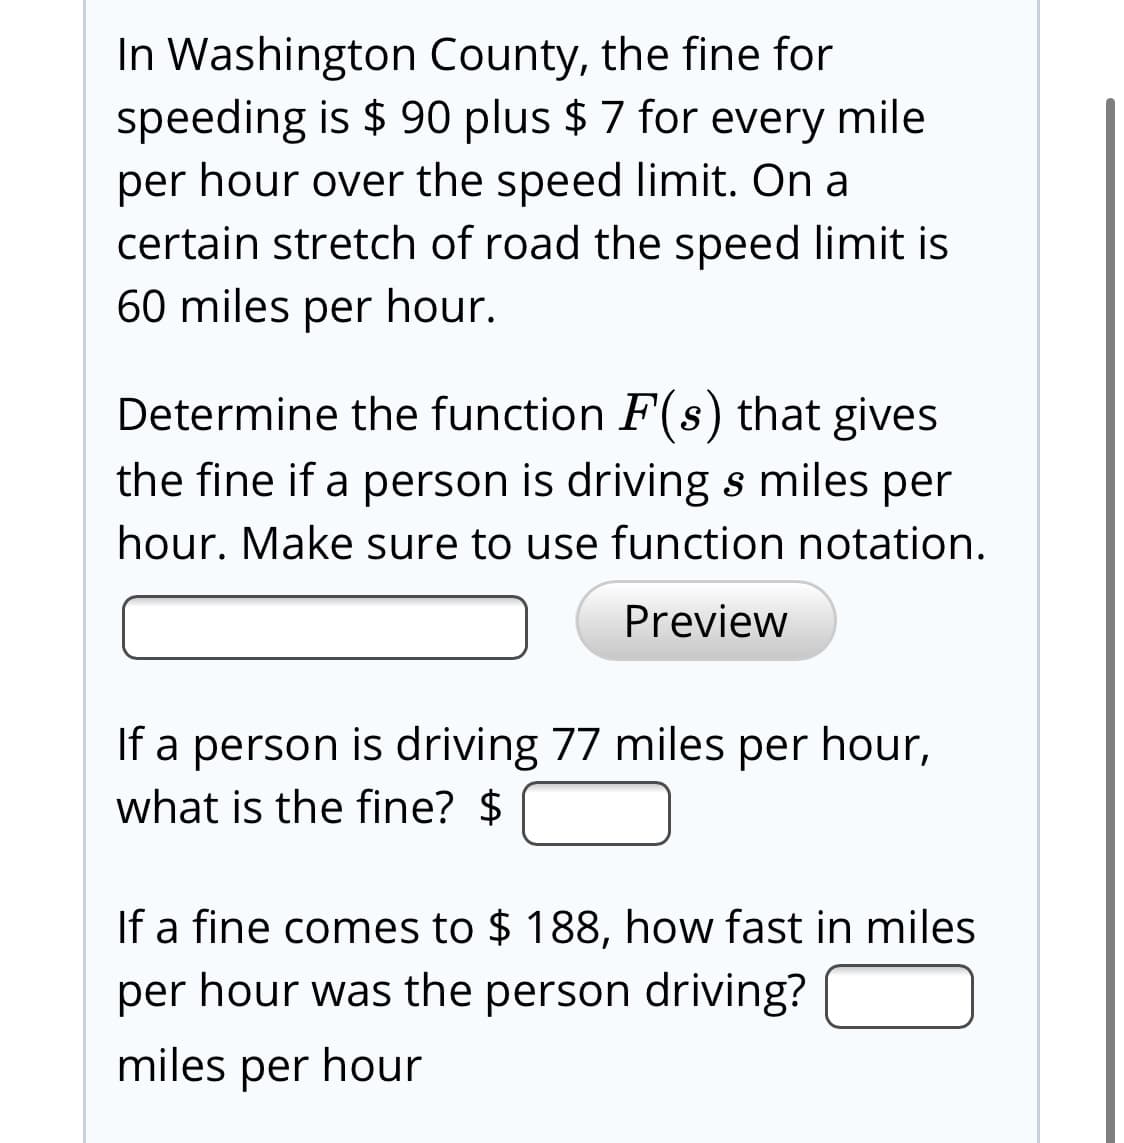 In Washington County, the fine for
speeding is $ 90 plus $ 7 for every mile
per hour over the speed limit. On a
certain stretch of road the speed limit is
60 miles per hour.
Determine the function F(s) that gives
the fine if a person is driving s miles per
hour. Make sure to use function notation.
Preview
If a person is driving 77 miles per hour,
what is the fine? $
If a fine comes to $ 188, how fast in miles
per hour was the person driving?
miles per hour
